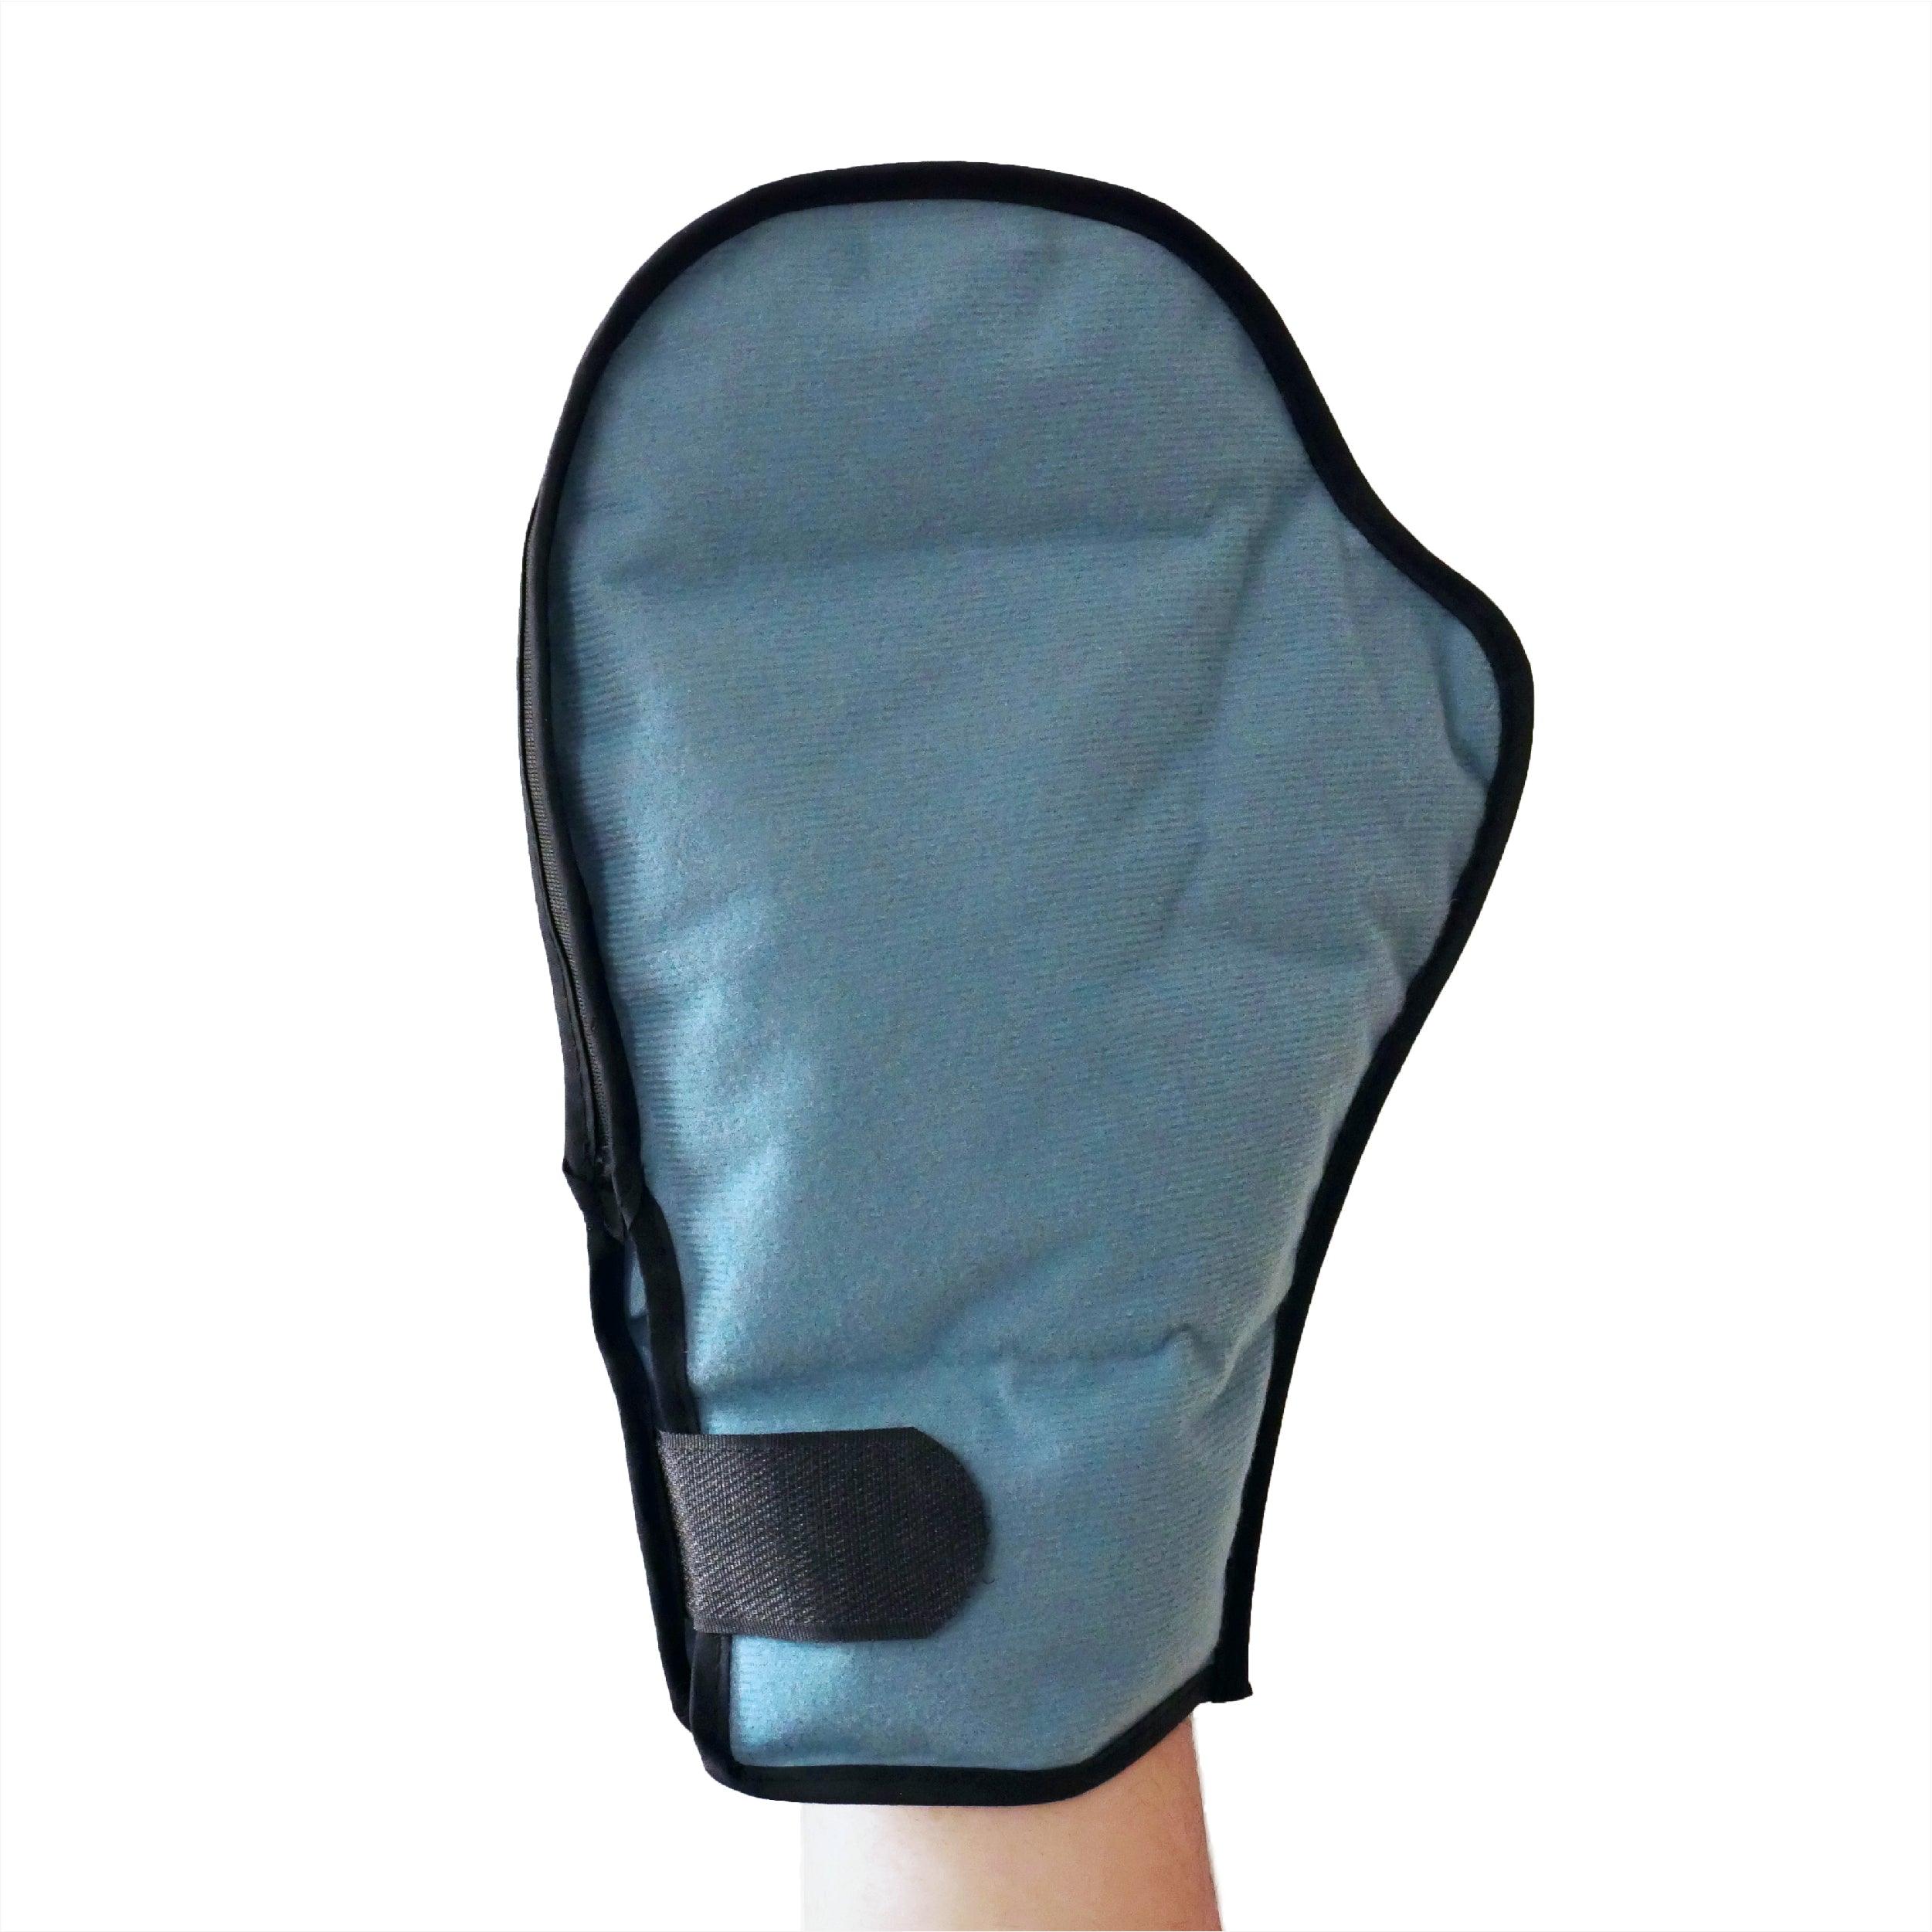 Advanced Gel Cooling Mitts | NatraCure